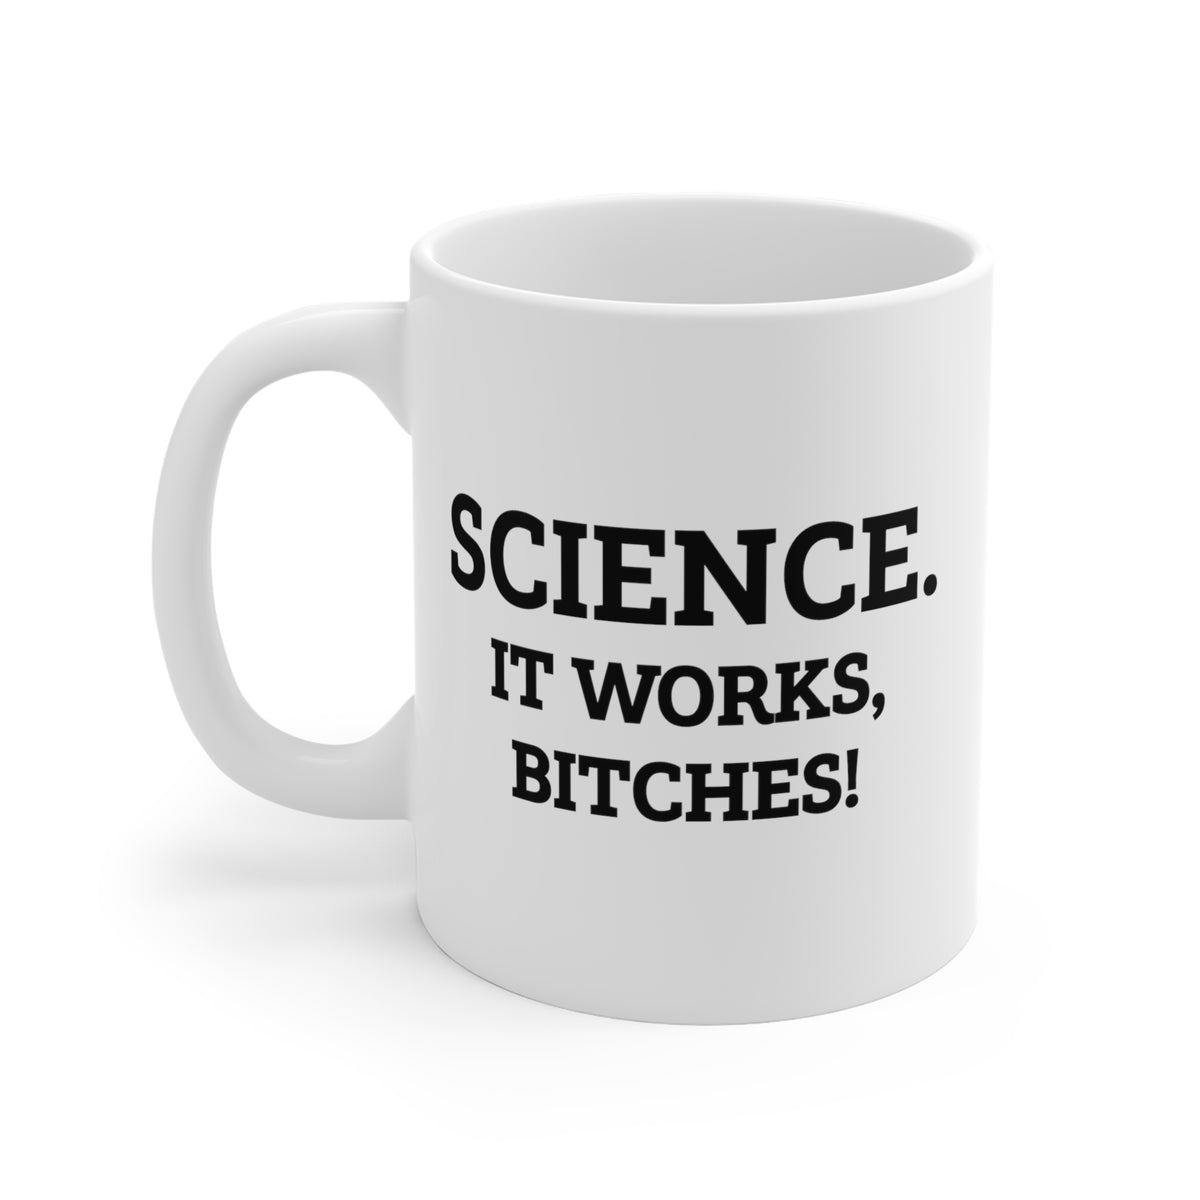 Funny Science Teacher Mug - Science. It Works, Bitches! - 11oz Coffee Mugs - Best Inspirational Gifts And Sarcasm